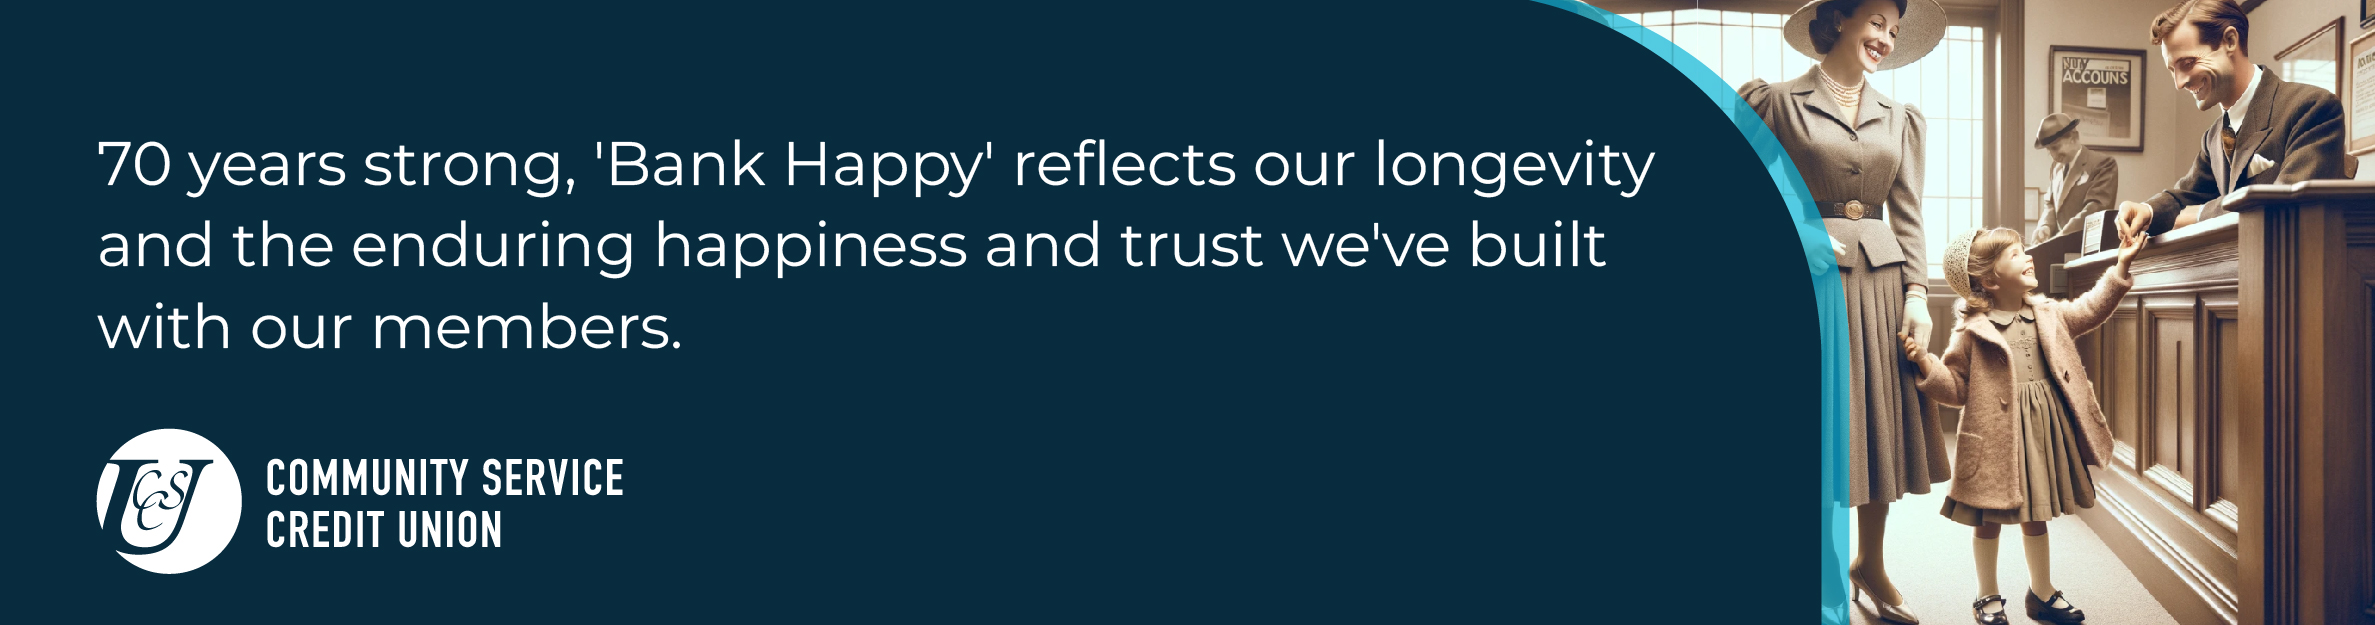 70 years strong, 'Bank Happy' reflects our longevity and the enduring happiness and trust we've built with our members. 